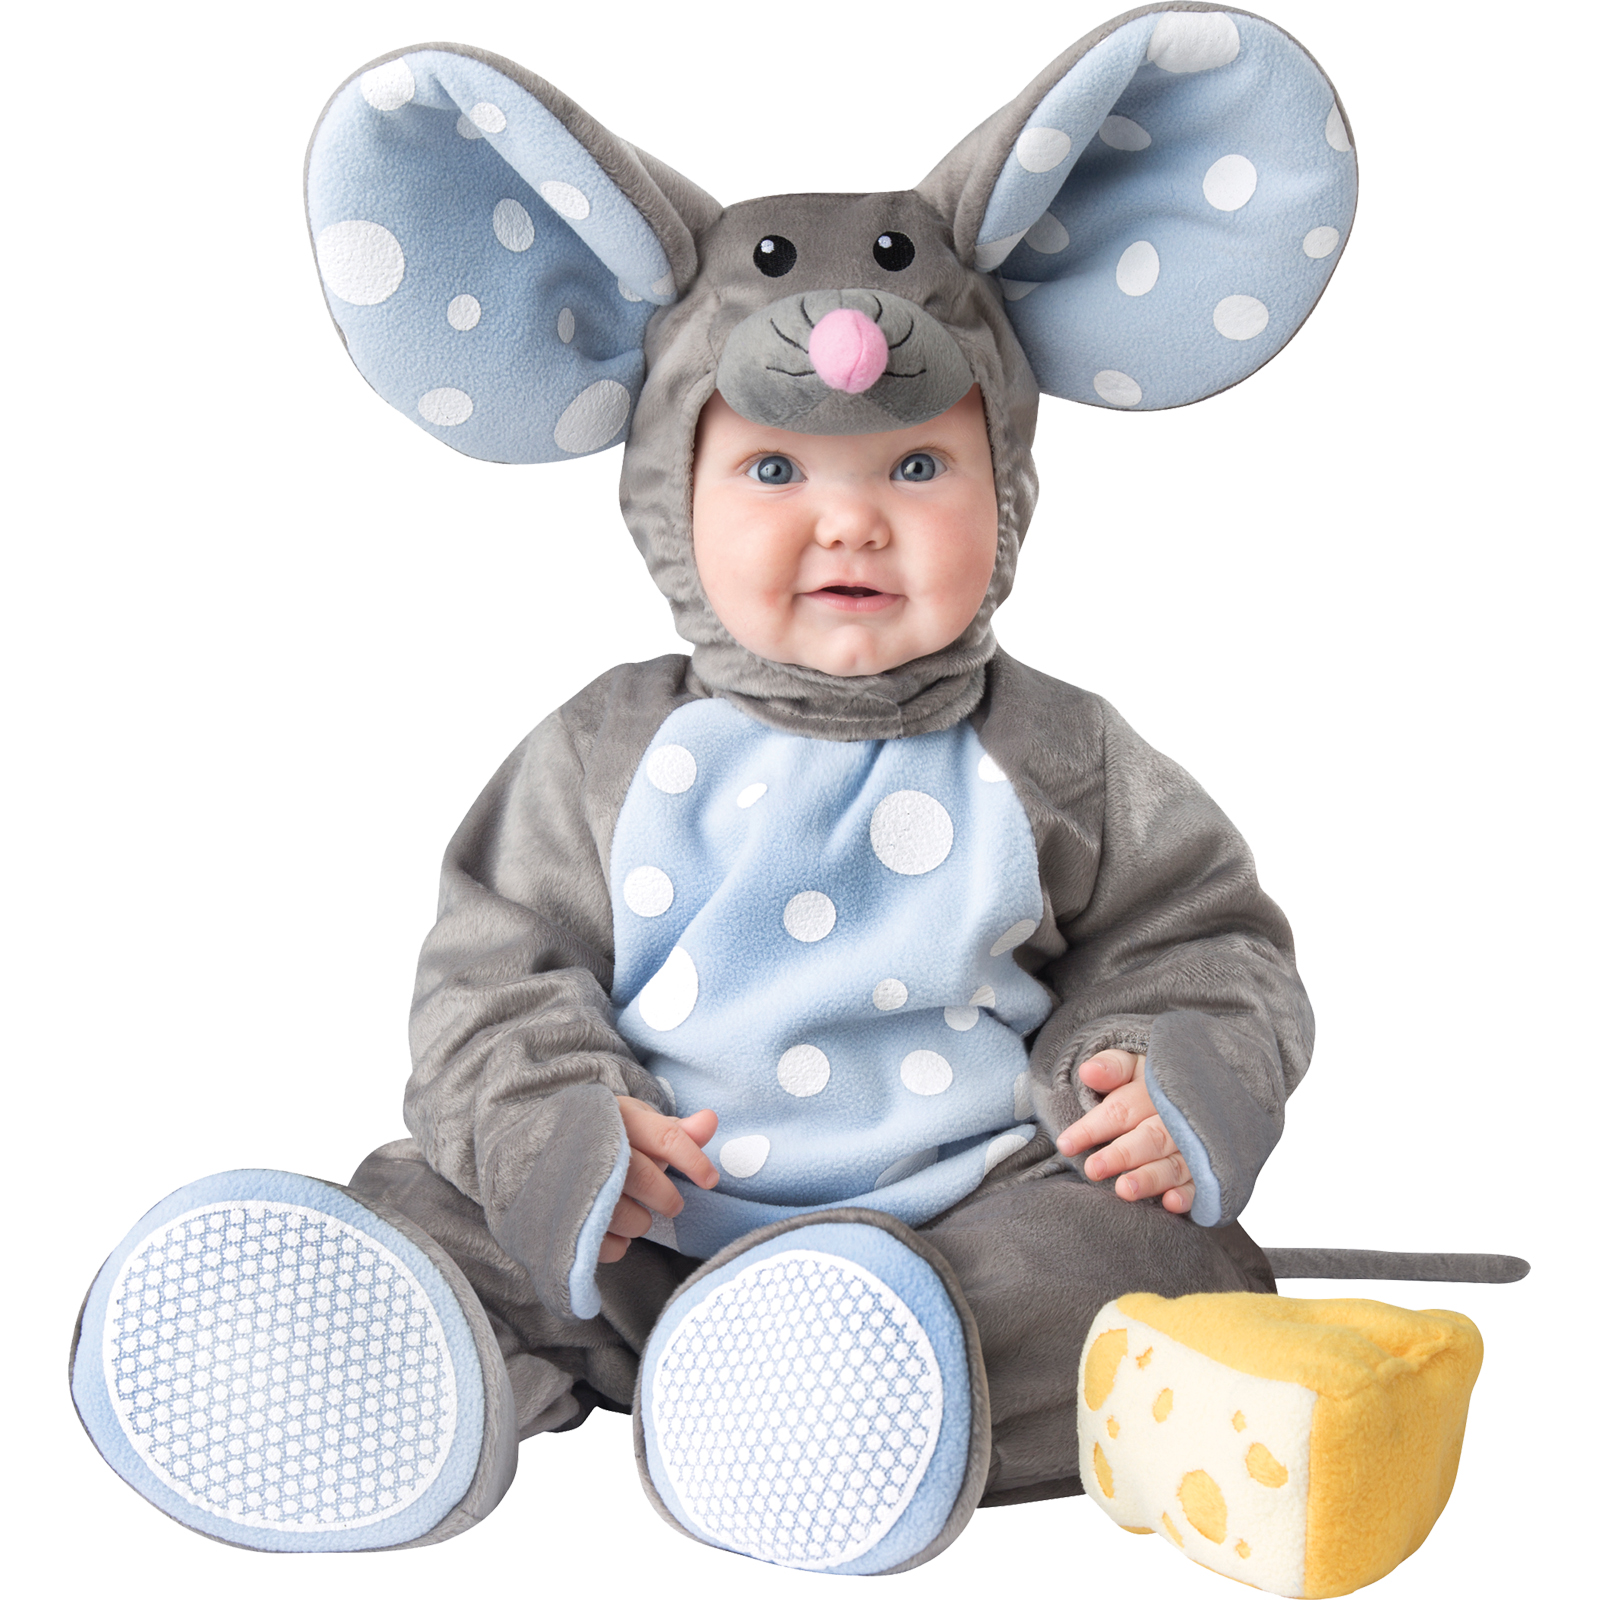 Lil' Mouse Toddler Costume